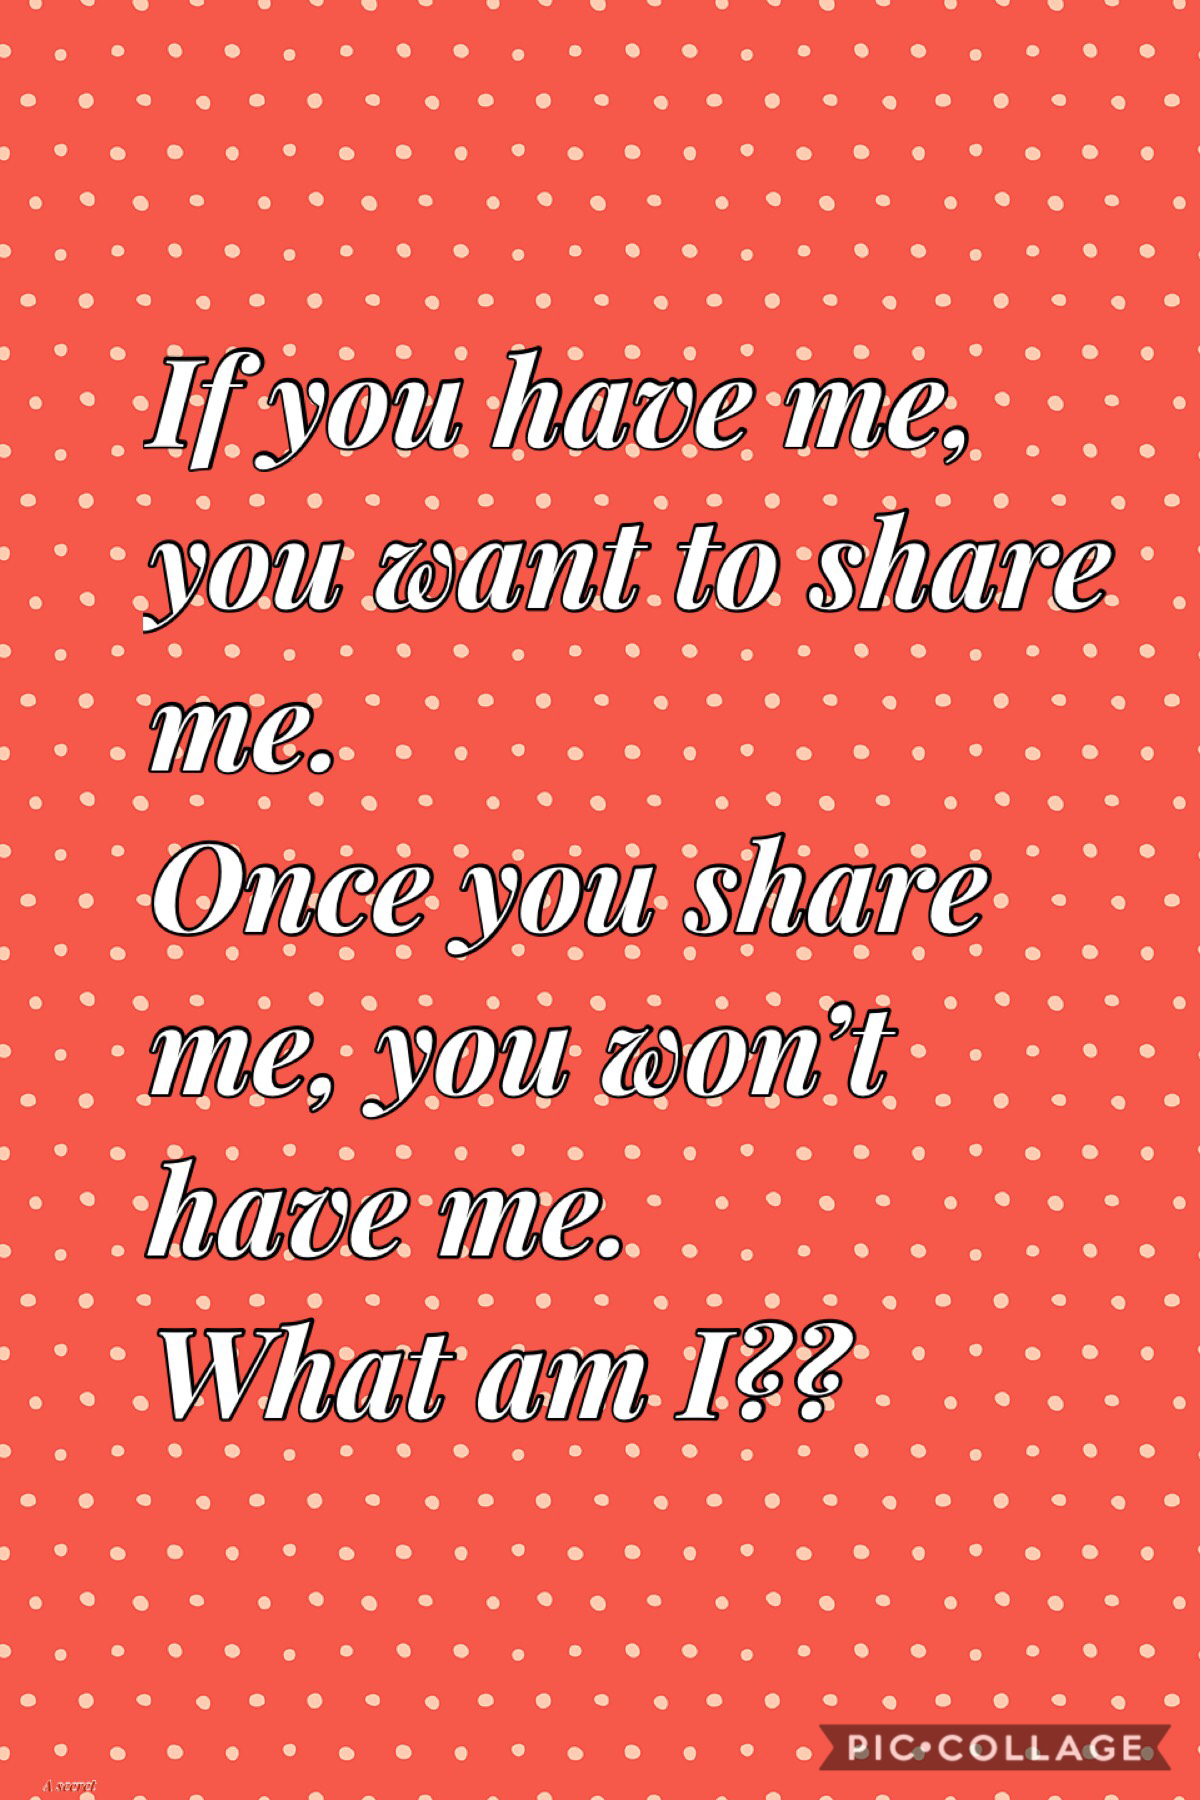 Here is a riddle see if you can guess it 